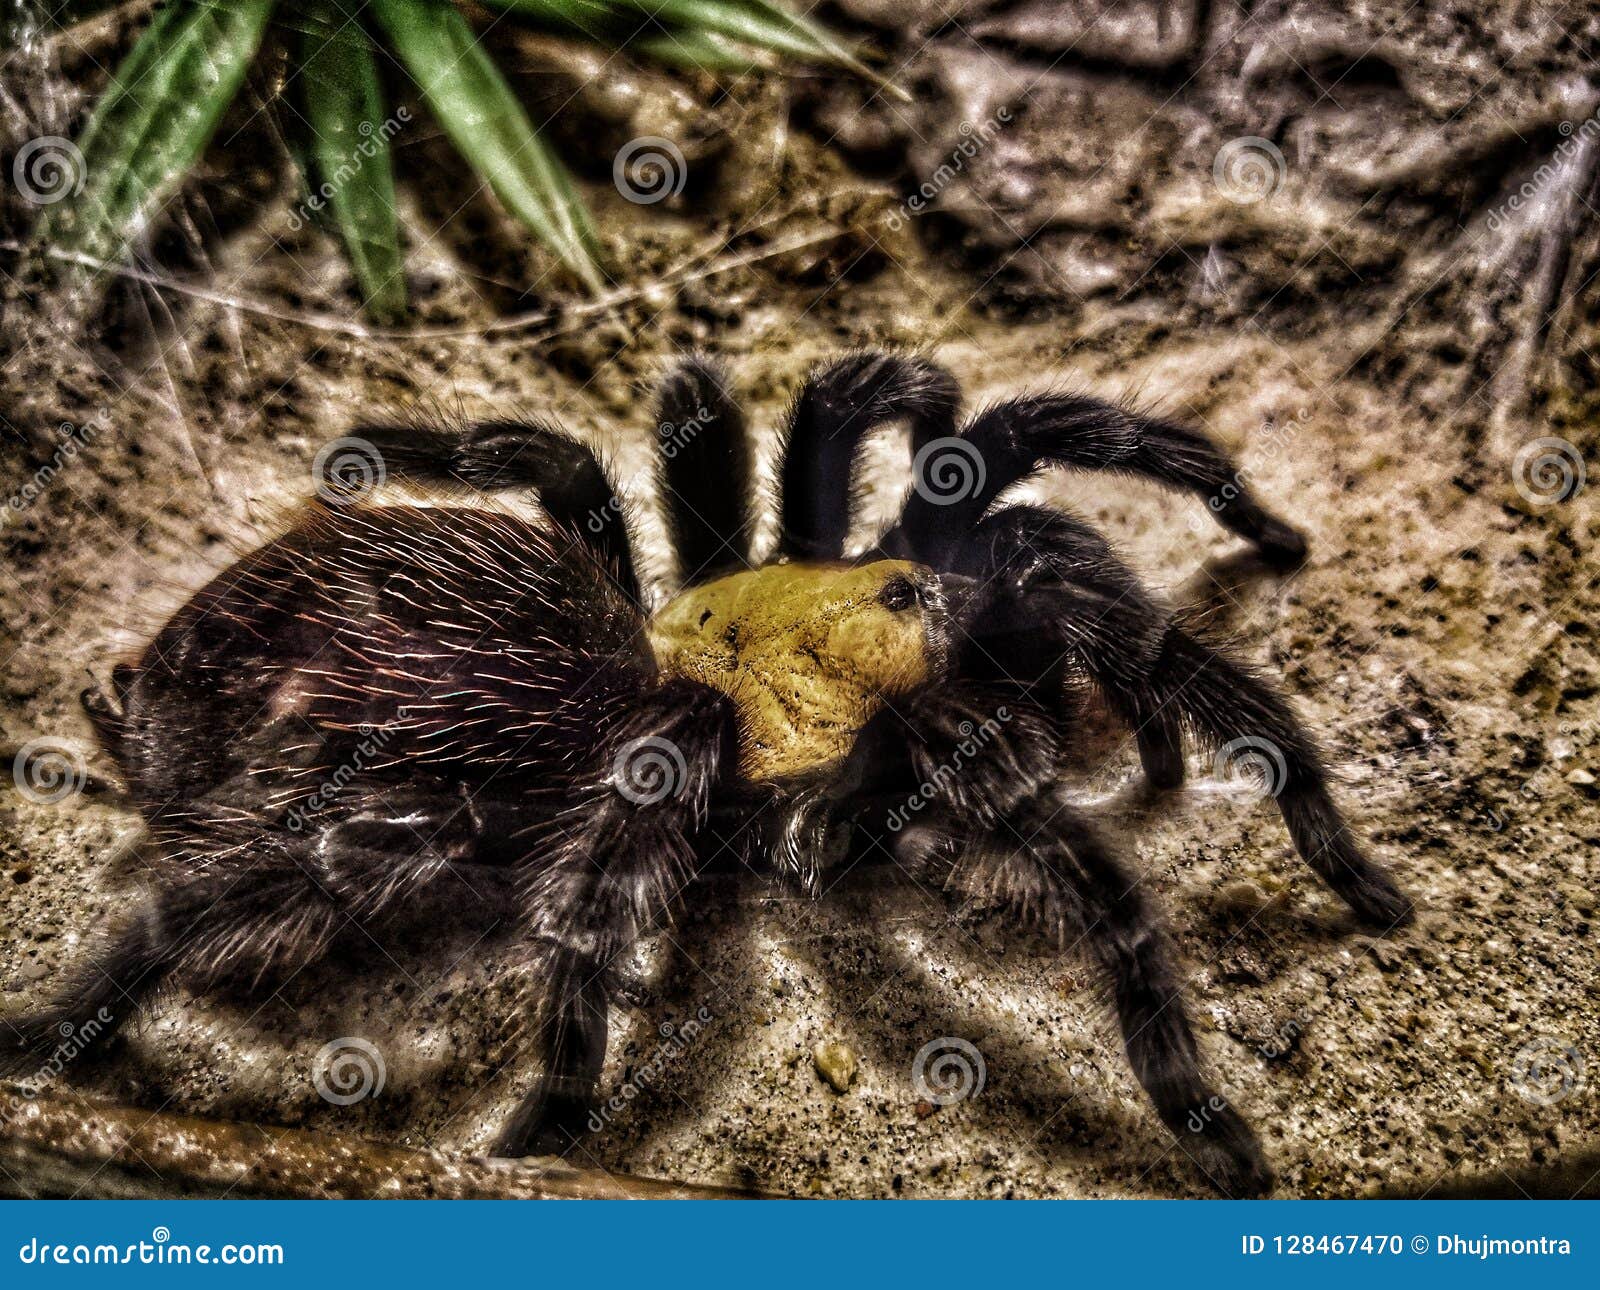 A Big Black Tarantula Spider with Hairy Long Legs. it Move Slowly and ...